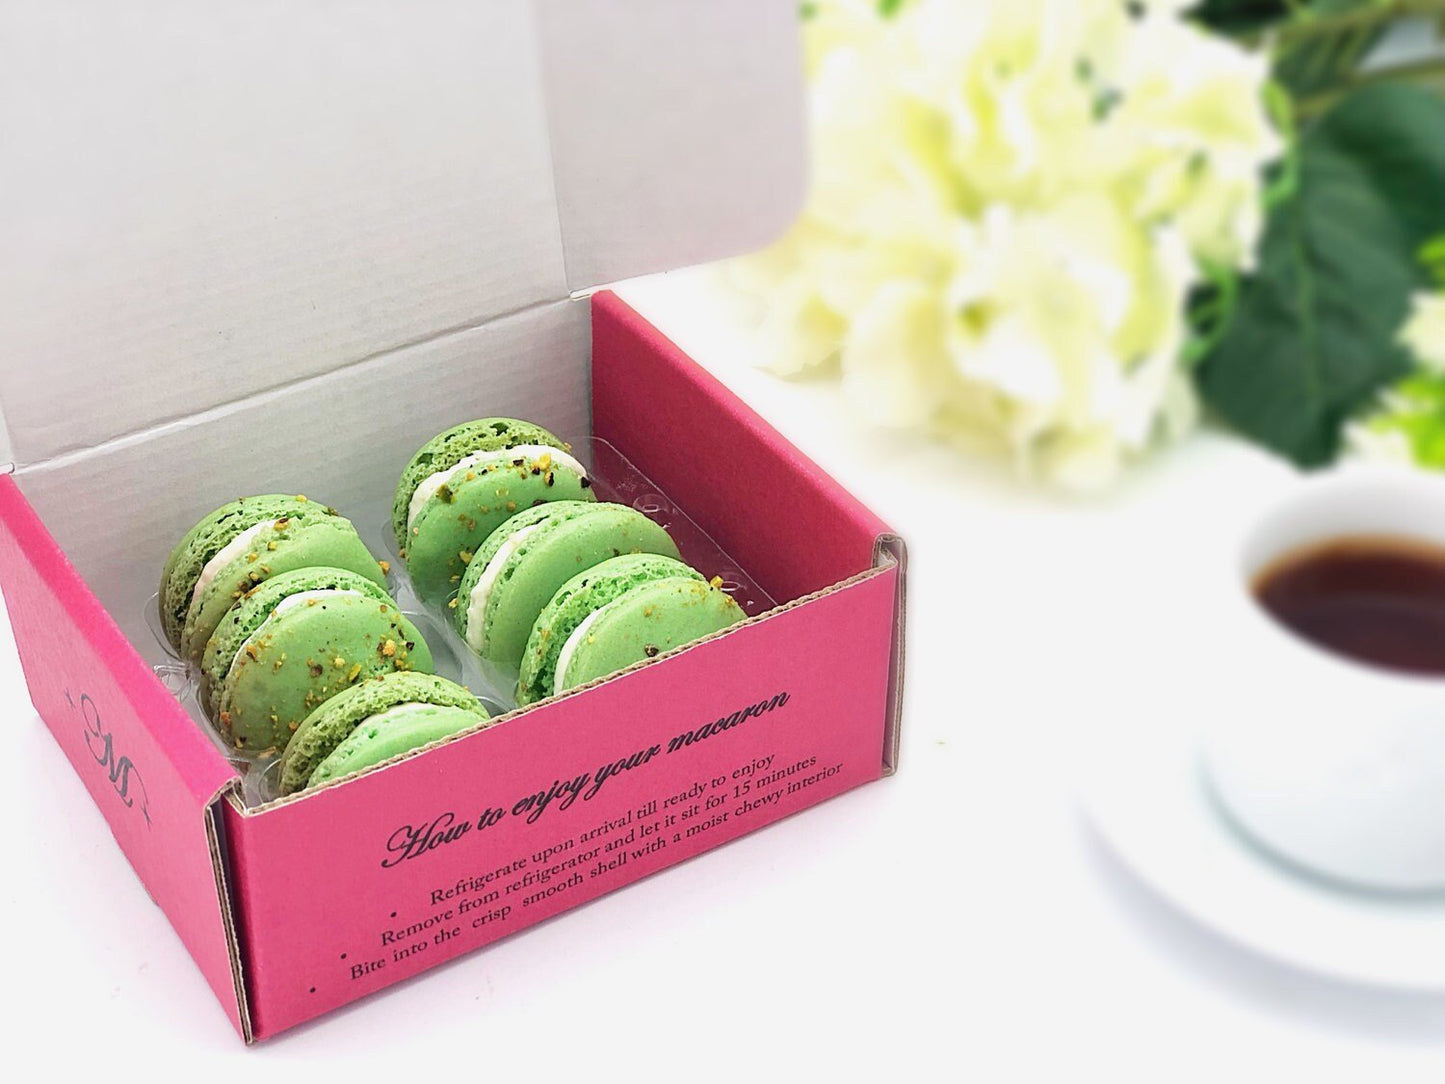 6 Pack pistachio French macarons - Macaron Centrale